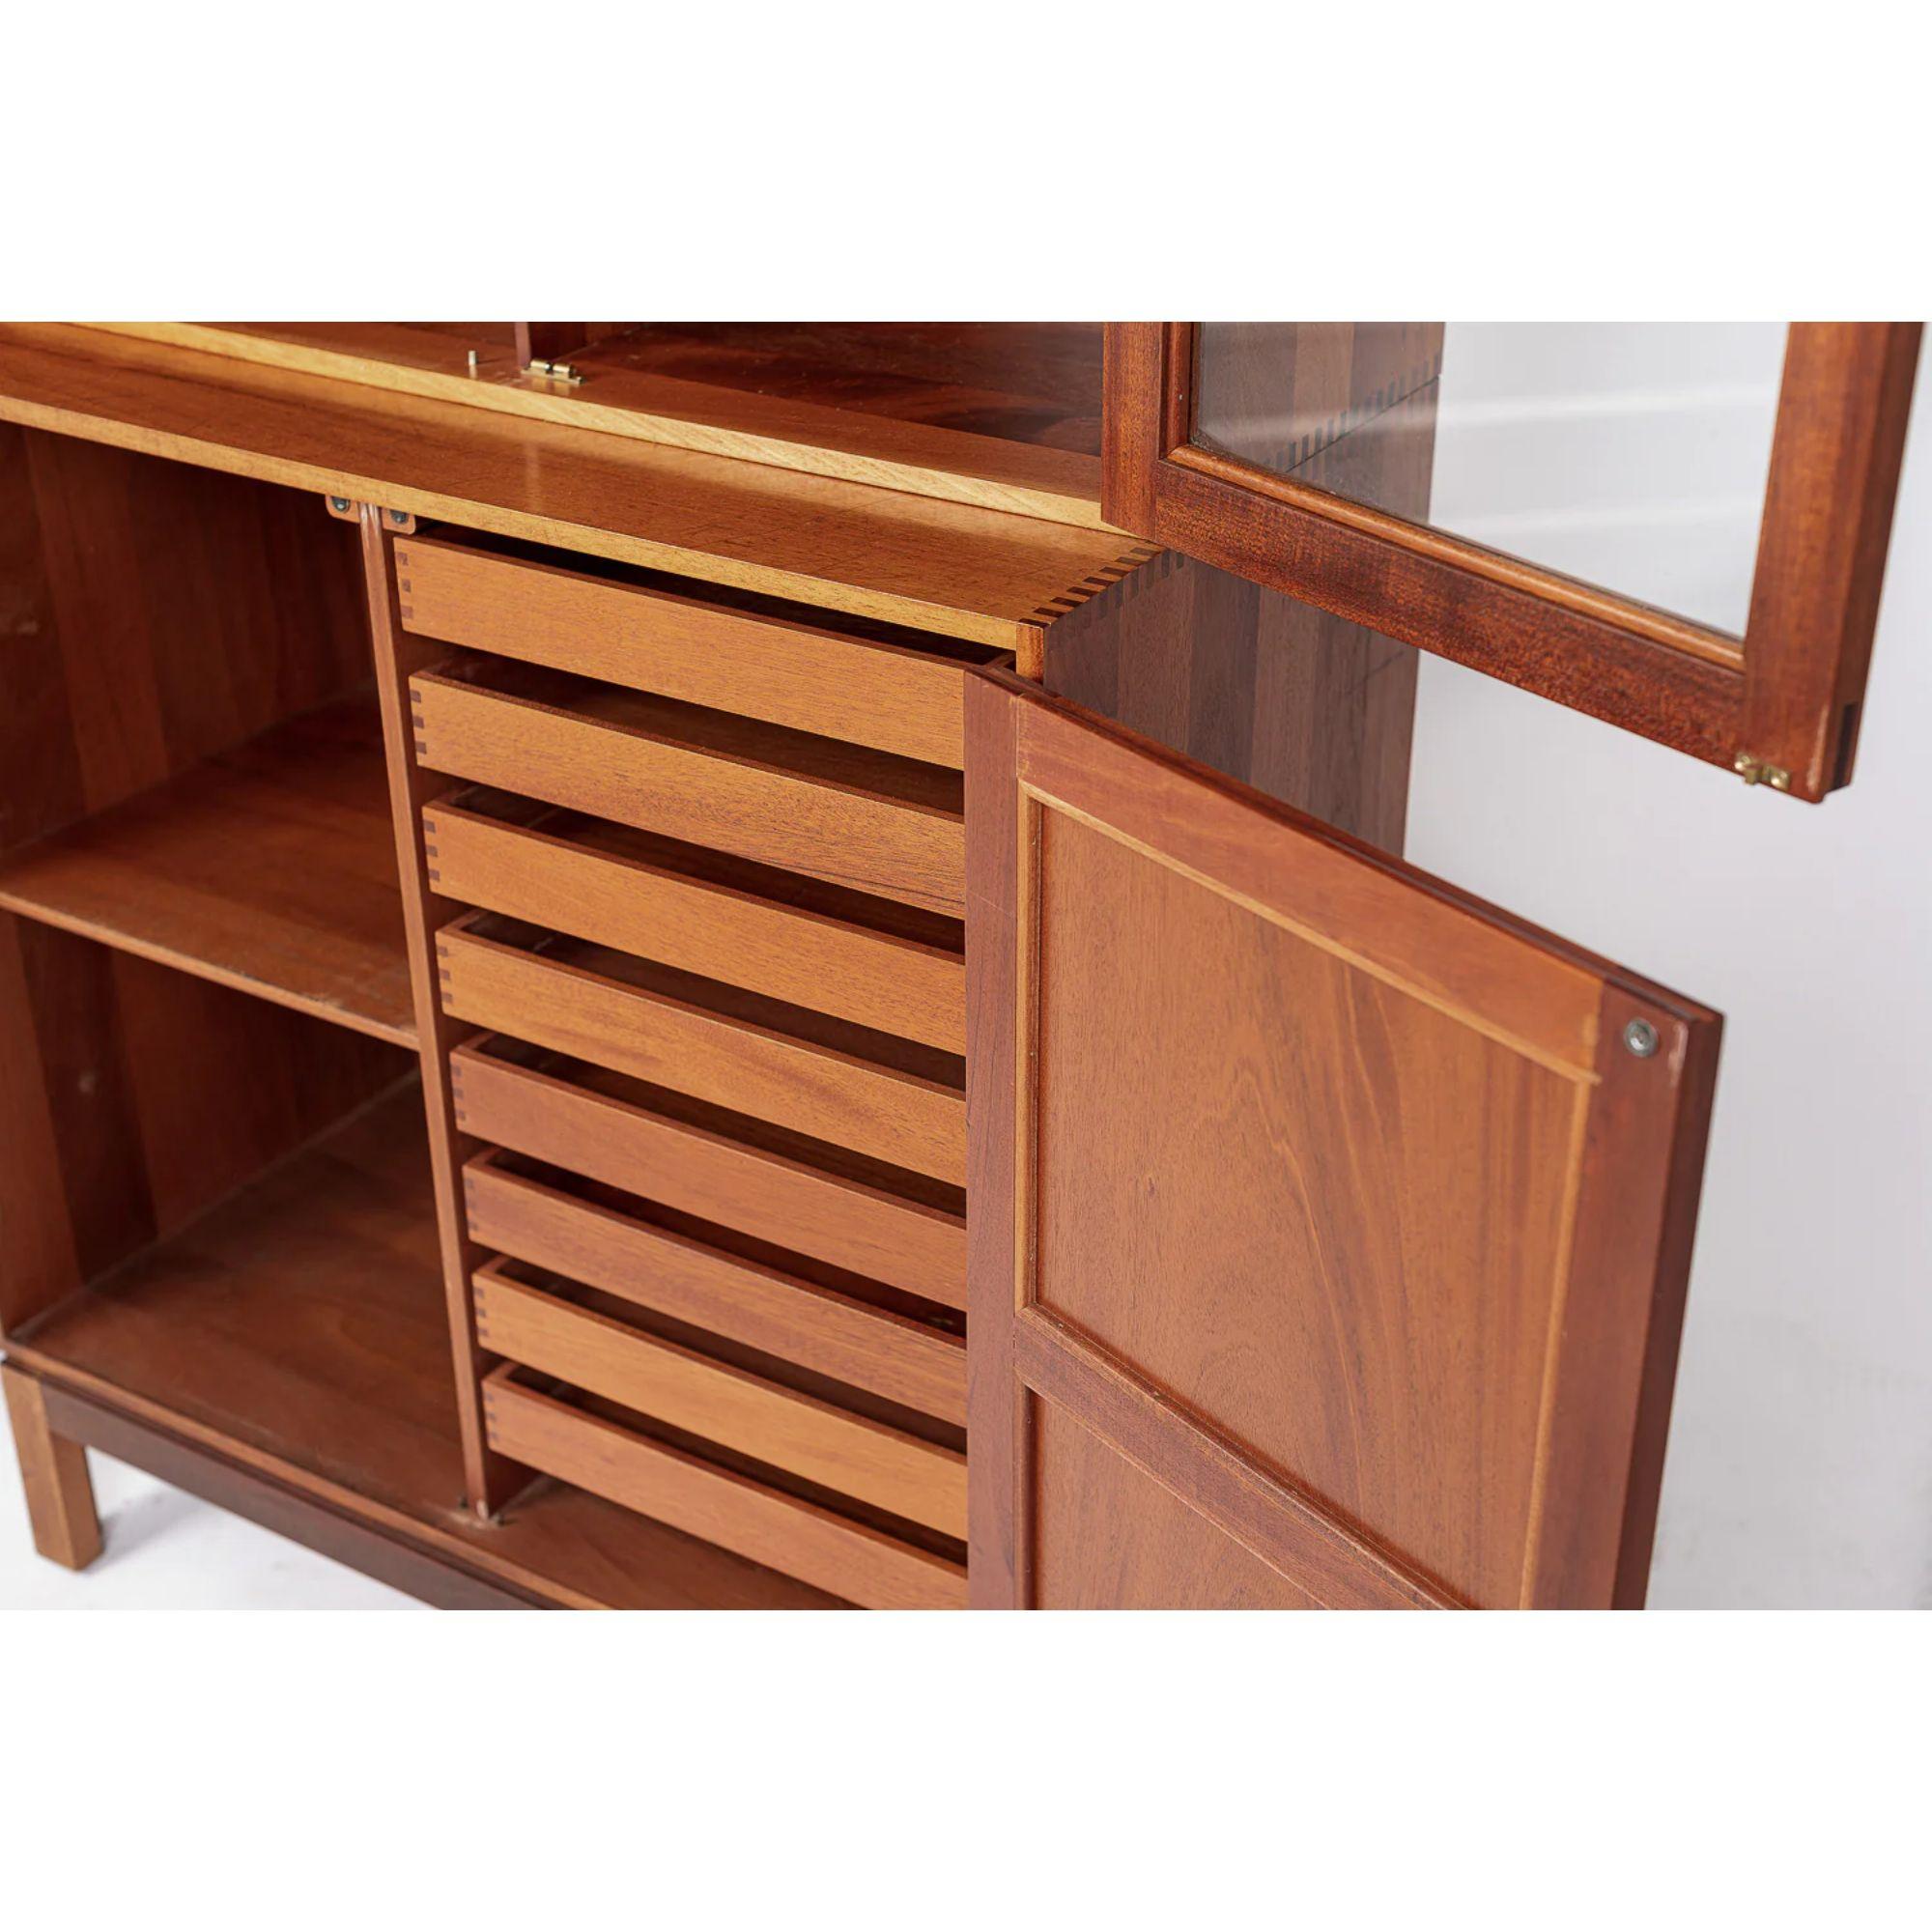 Midcentury Danish Wood Storage Cabinets with Glass Doors & File Drawer 4